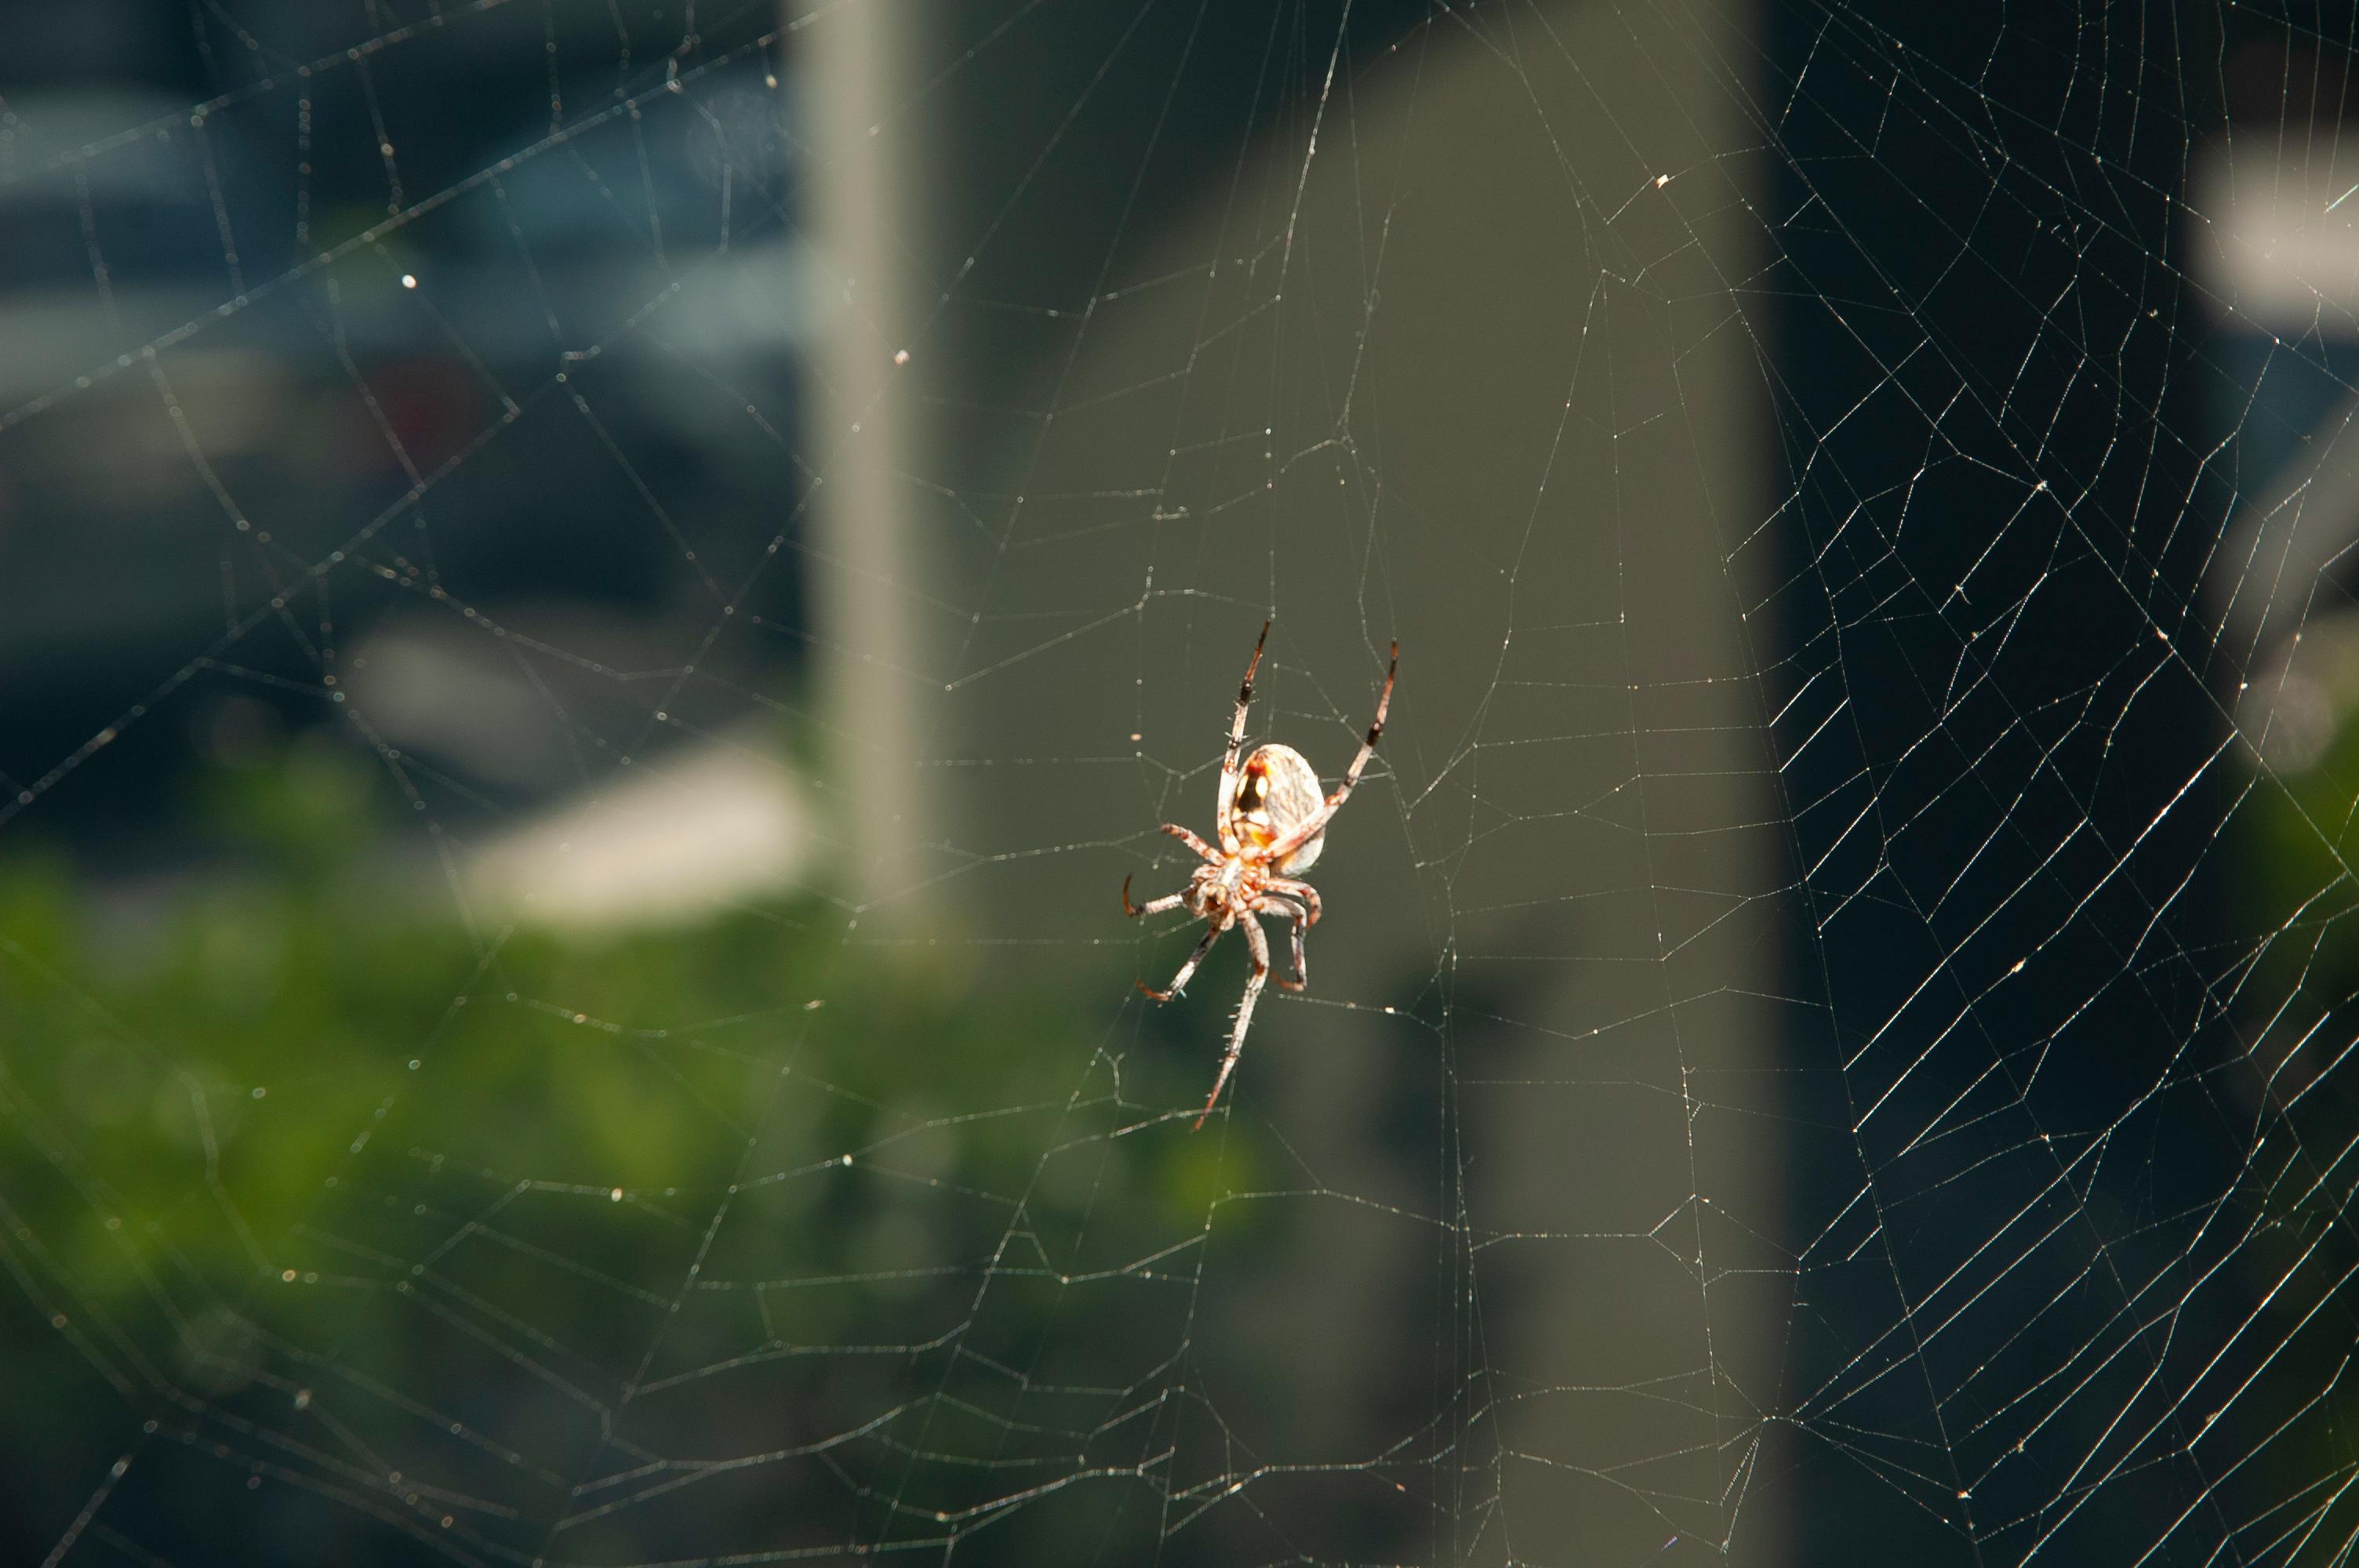 Free stock photo of spider, spider web